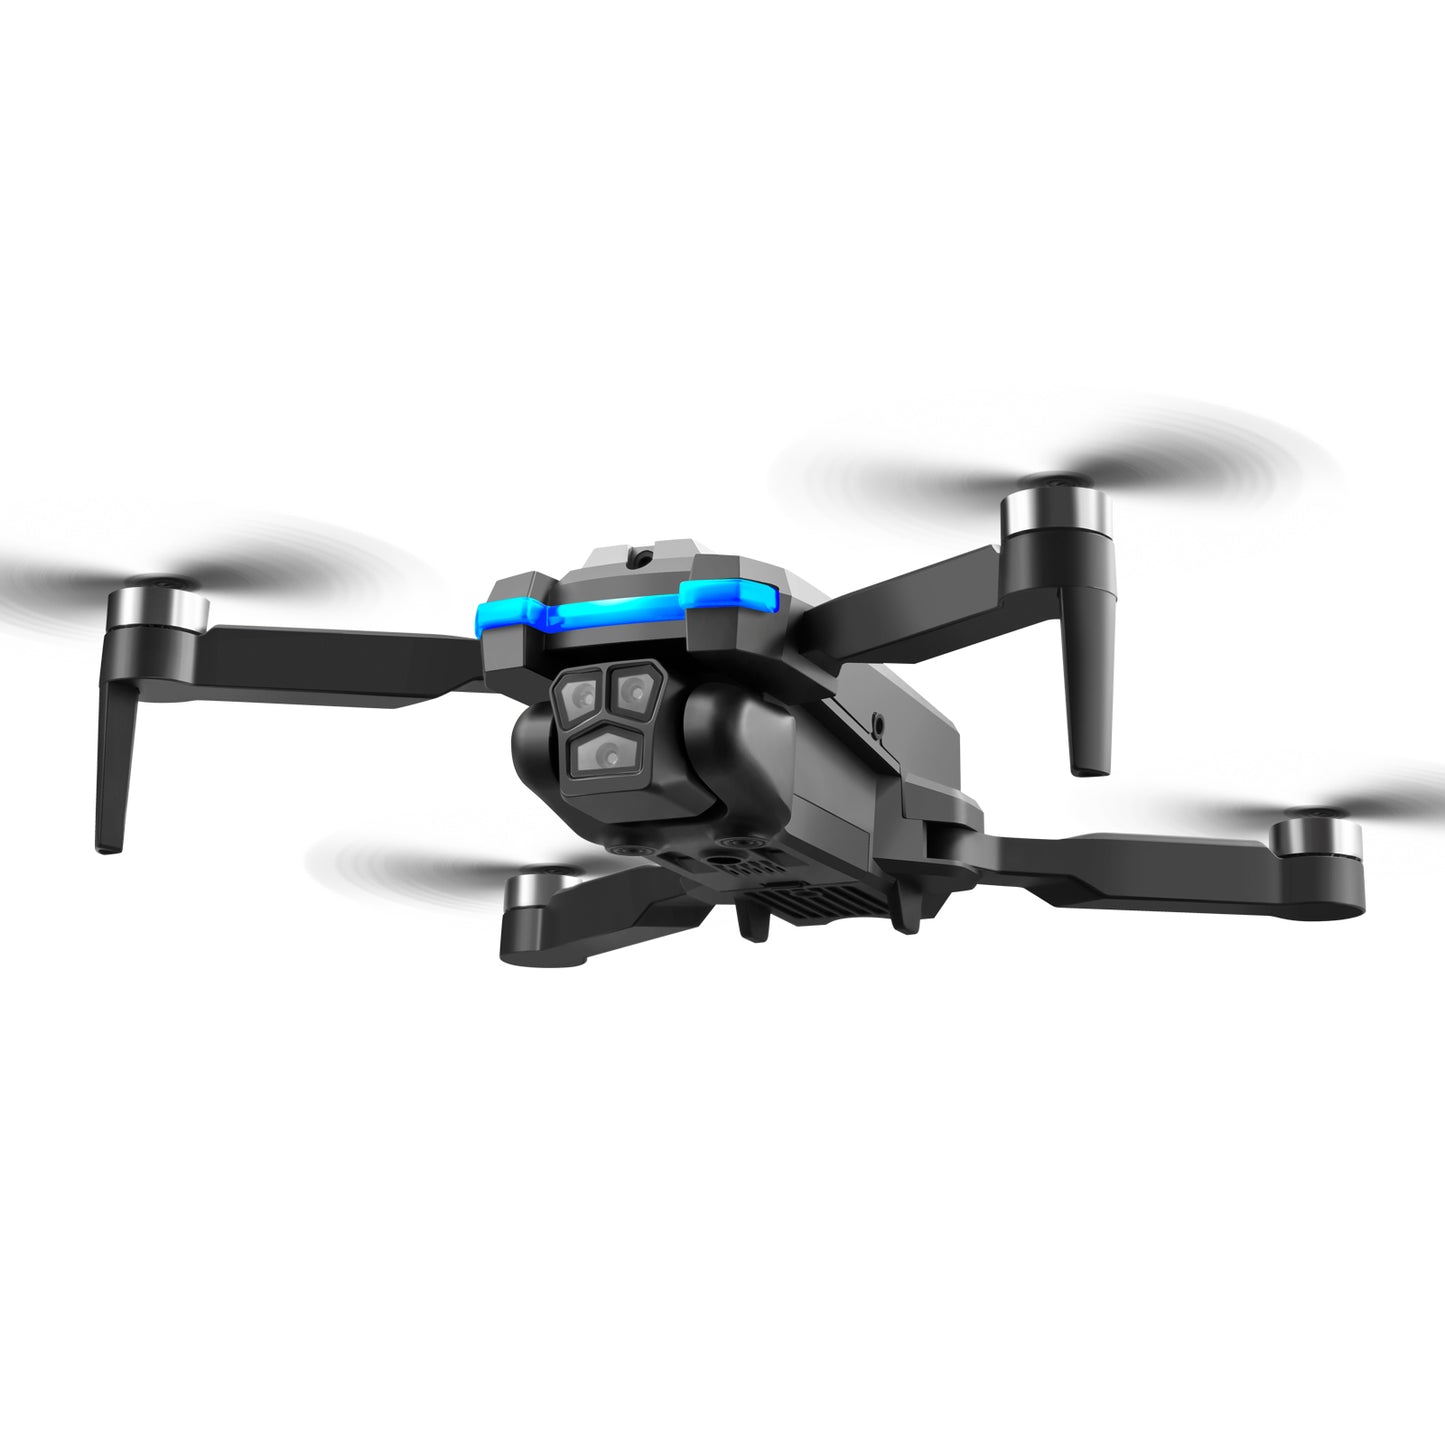 LS S8S Drone - 2.4G optical flow three-camera brushless drone with dual lens WIFI professional aerial photography drone